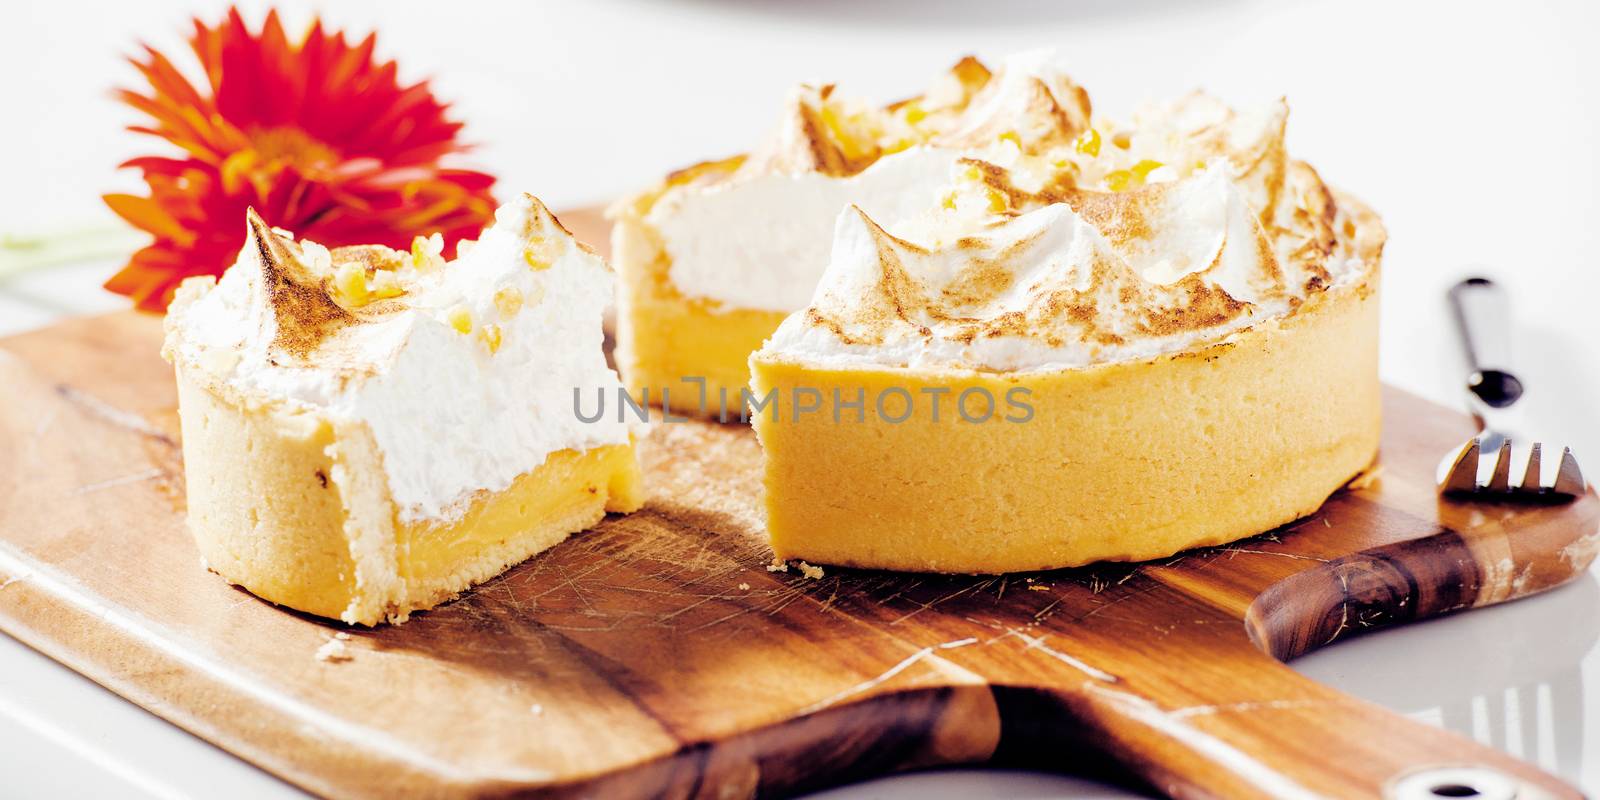 Lemon meringue pie on a timber board with a flower and plate in the background